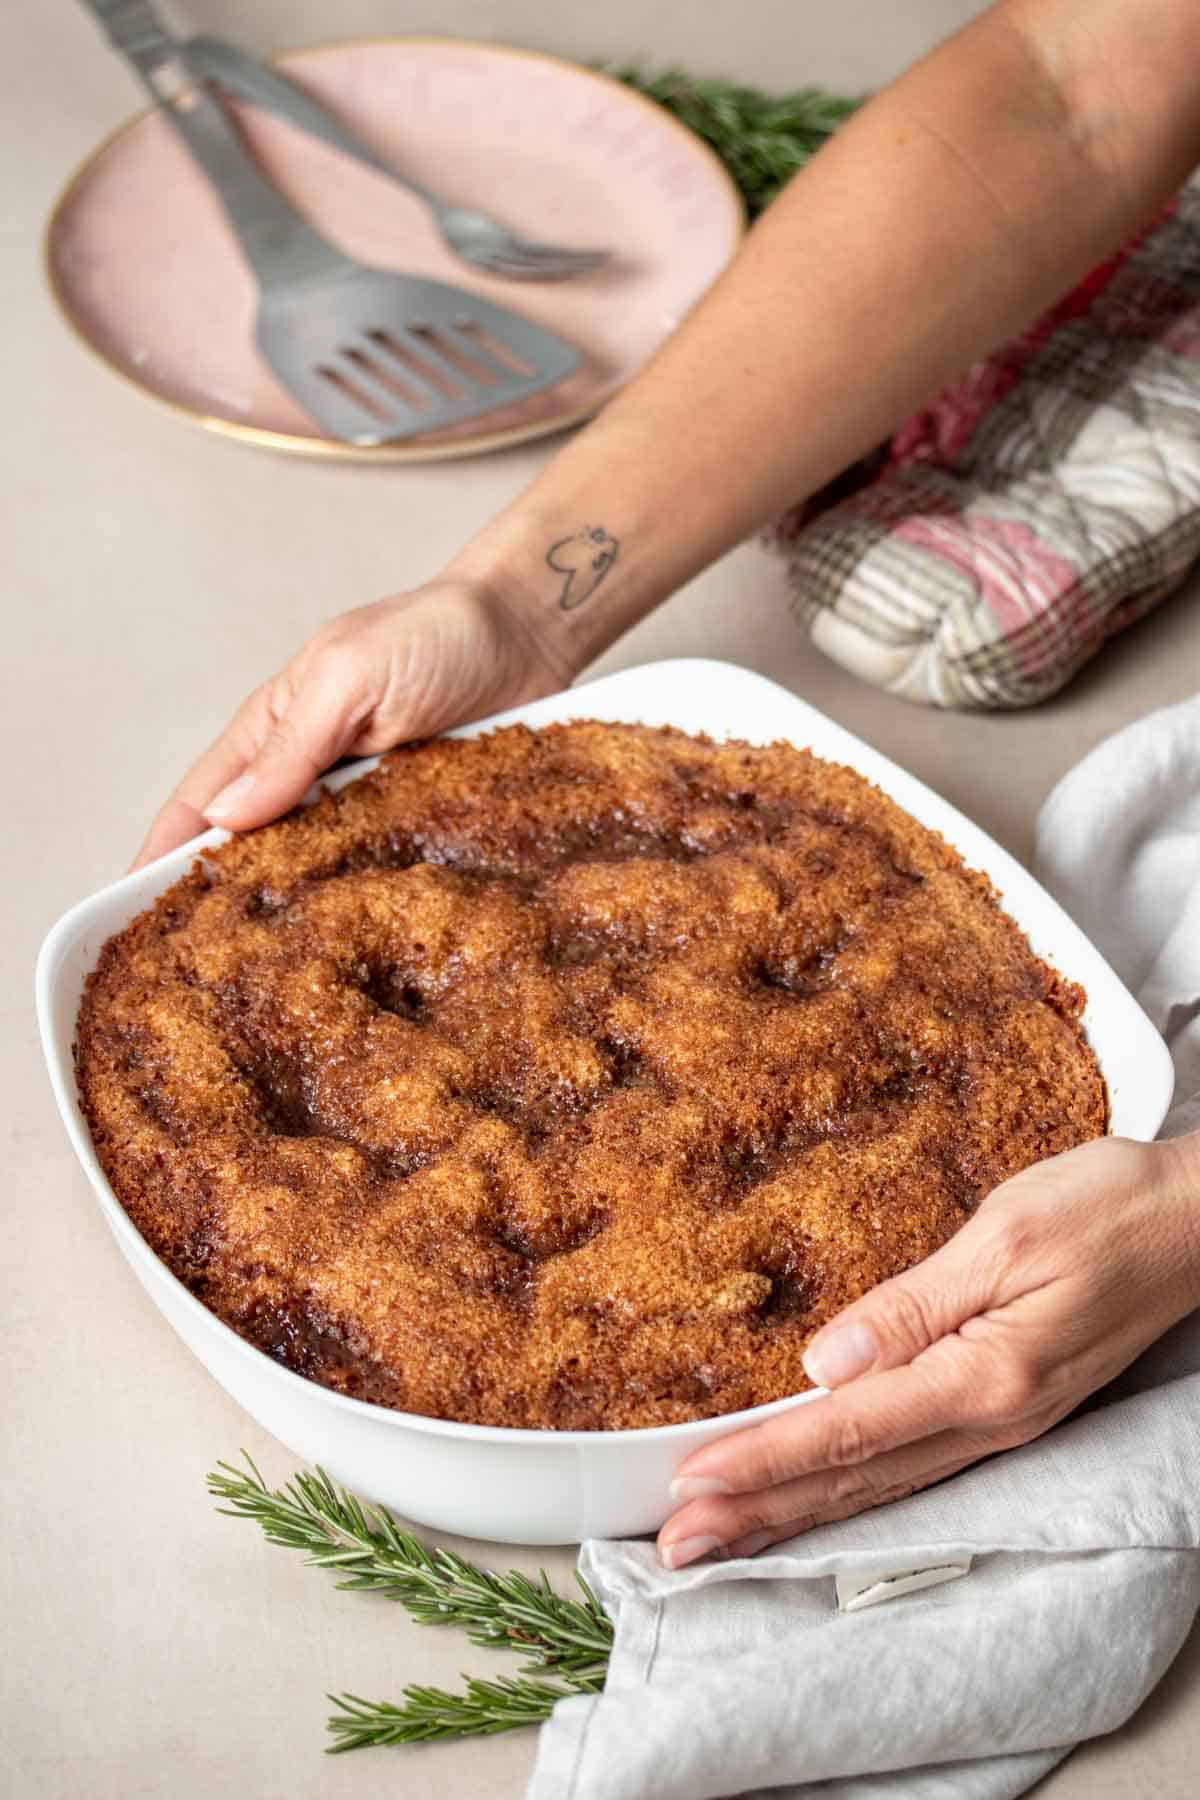 Hands holding a white baking dish with baked coffee cake in it and setting it on a tan surface with a grey towel.